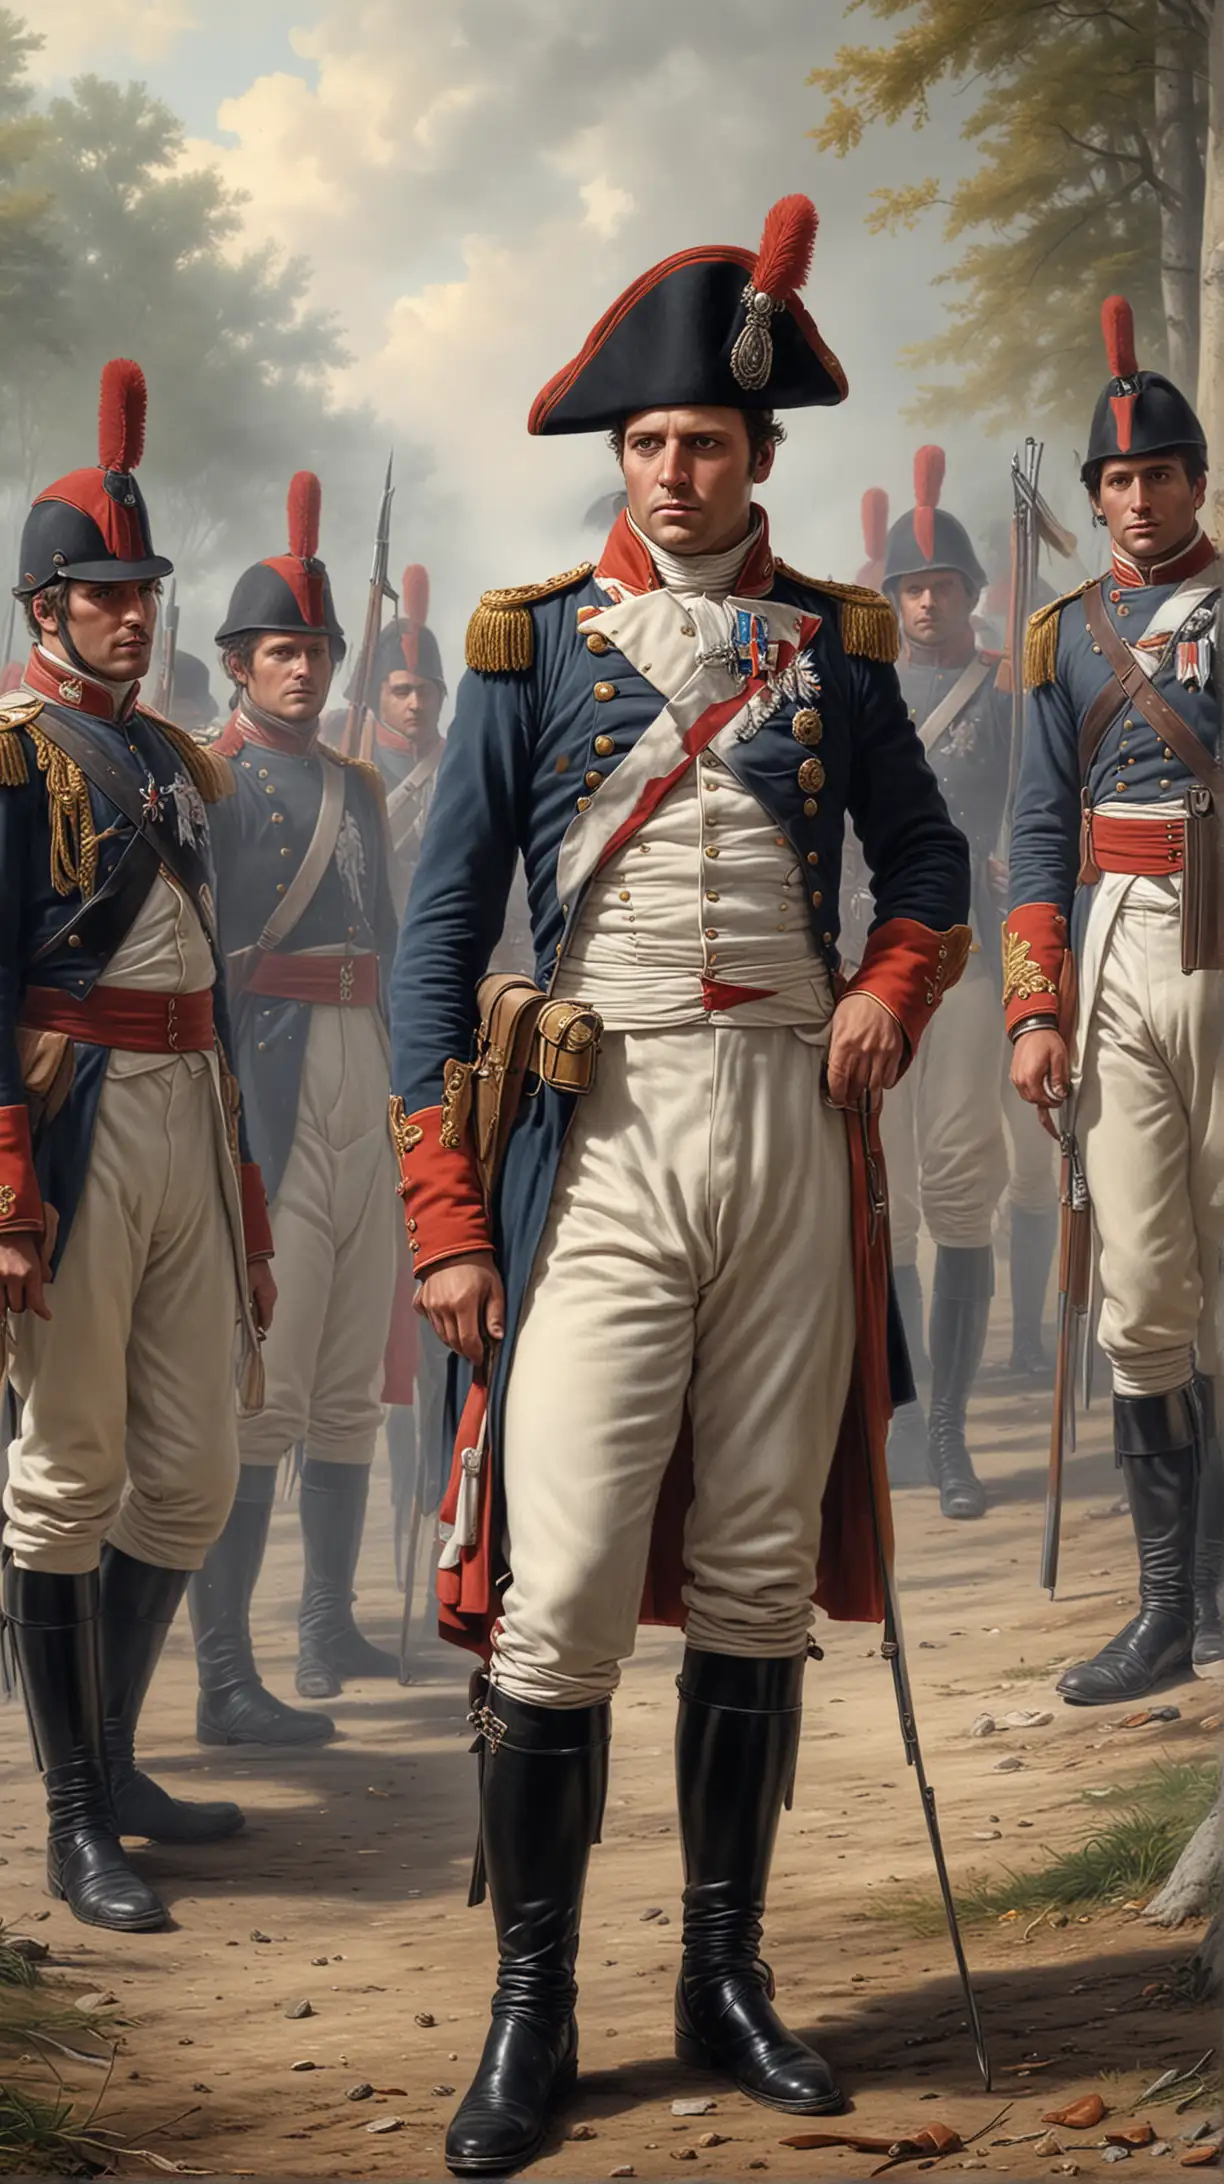 Painting of Napoleon with Swiss soldiers. Hyper realistic